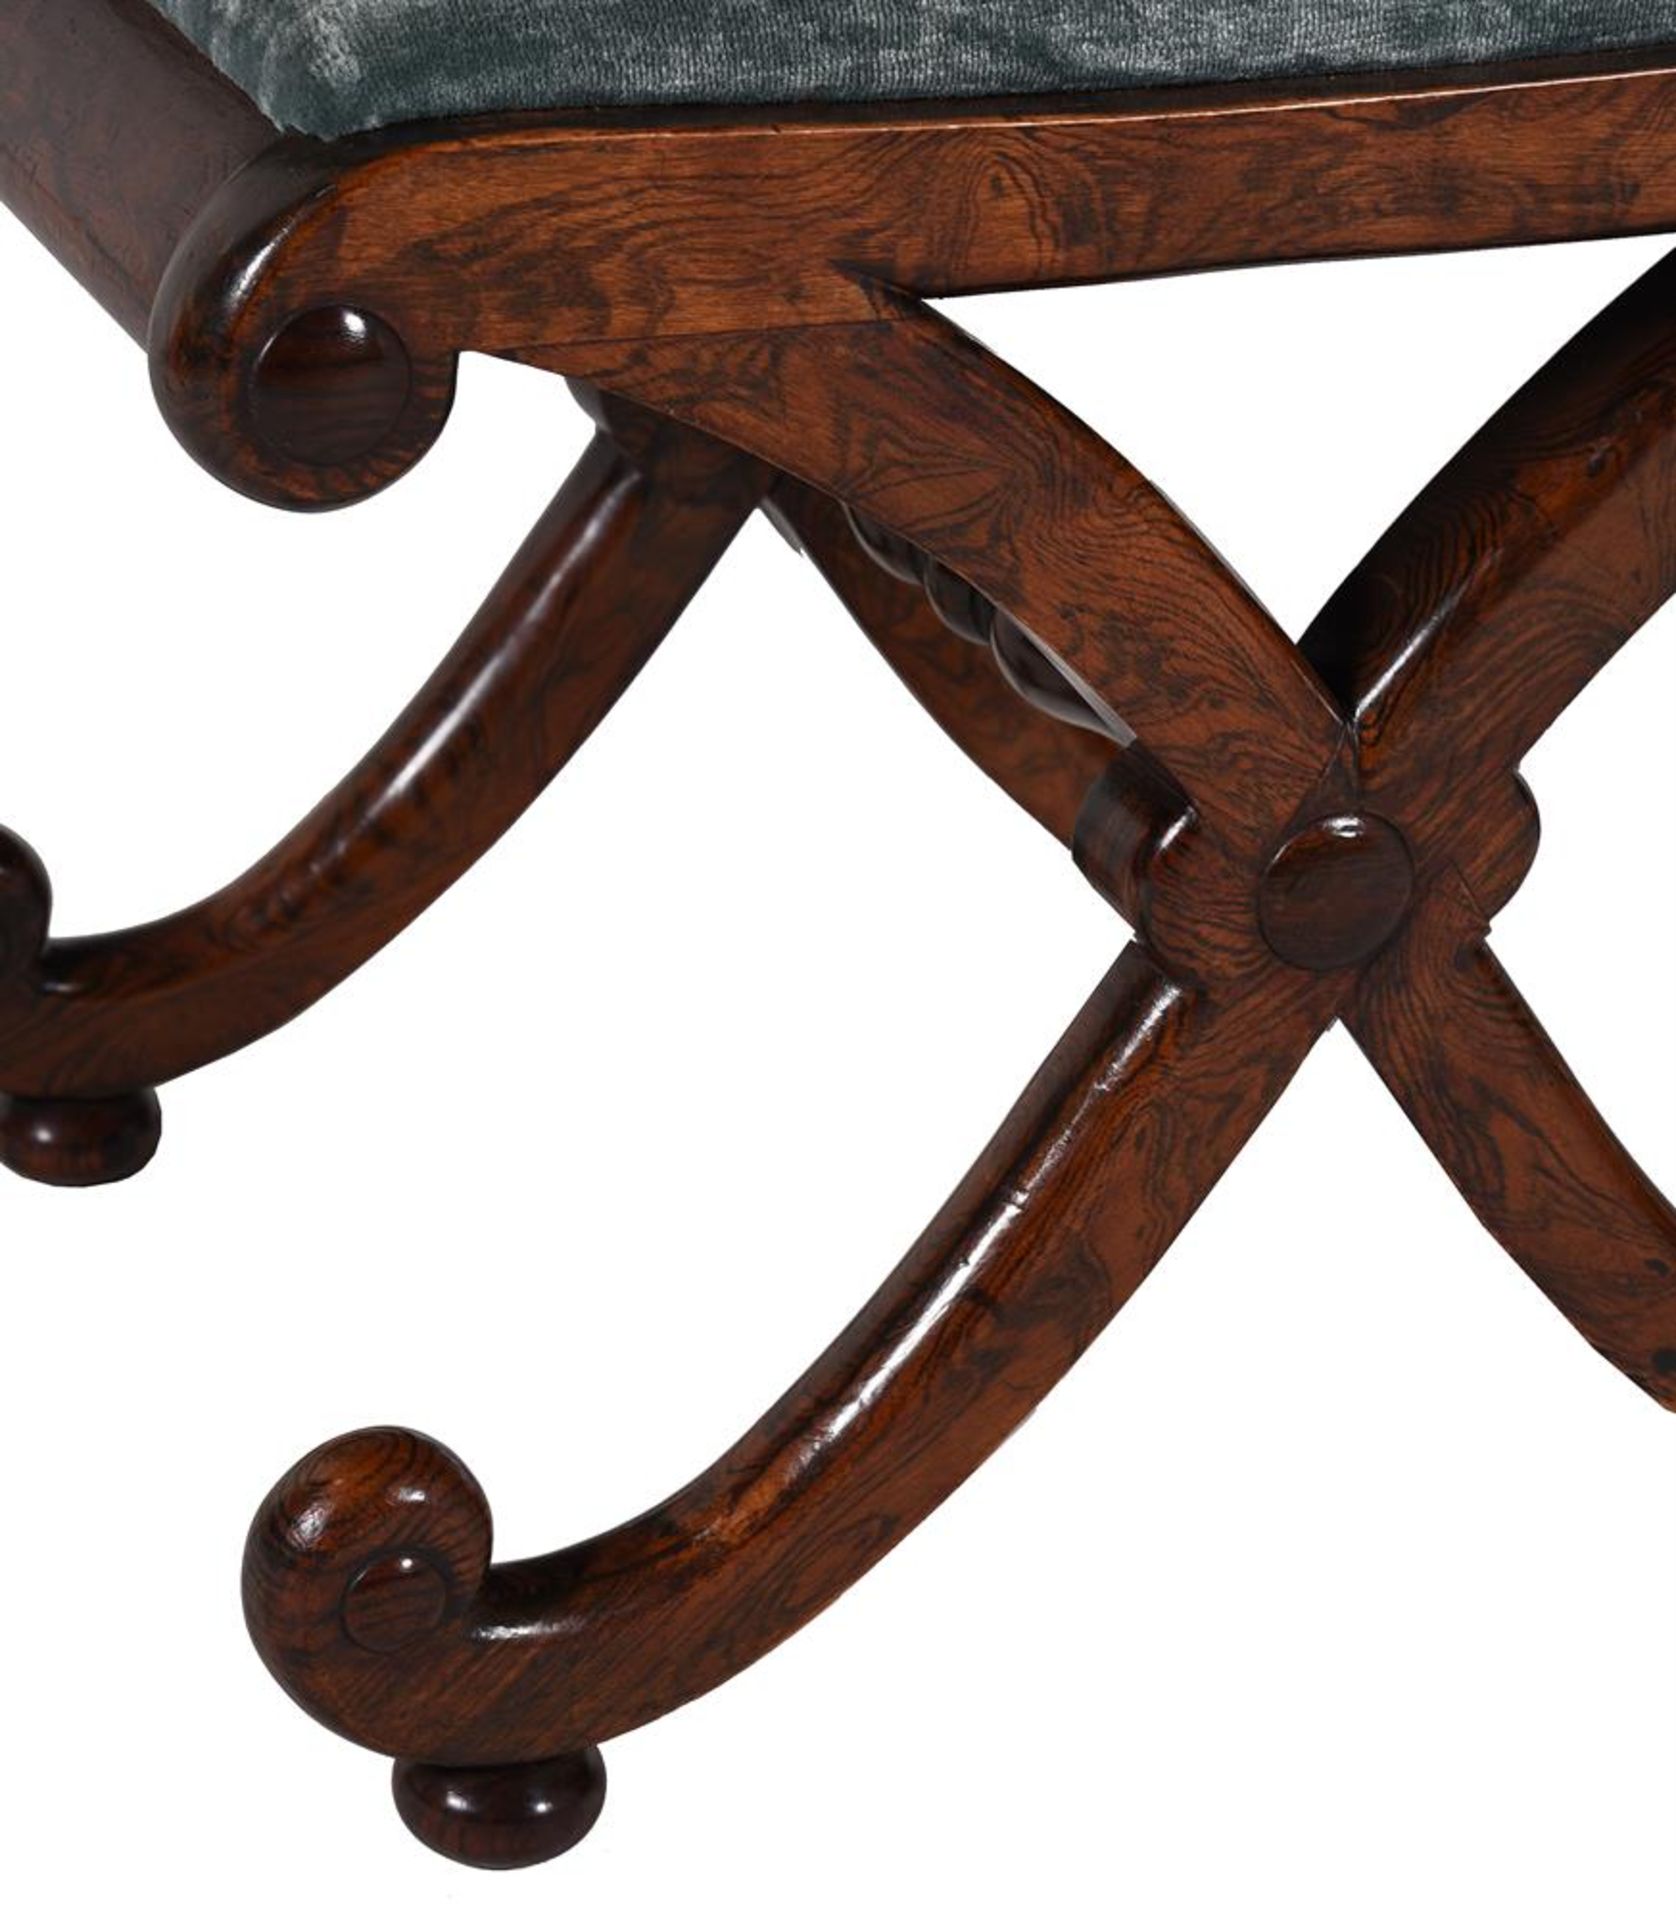 A PAIR OF REGENCY SIMULATED ROSEWOOD BEECH X FRAME STOOLS, ATTRIBUTED TO GILLOWS, EARLY 19TH CENTURY - Image 2 of 3